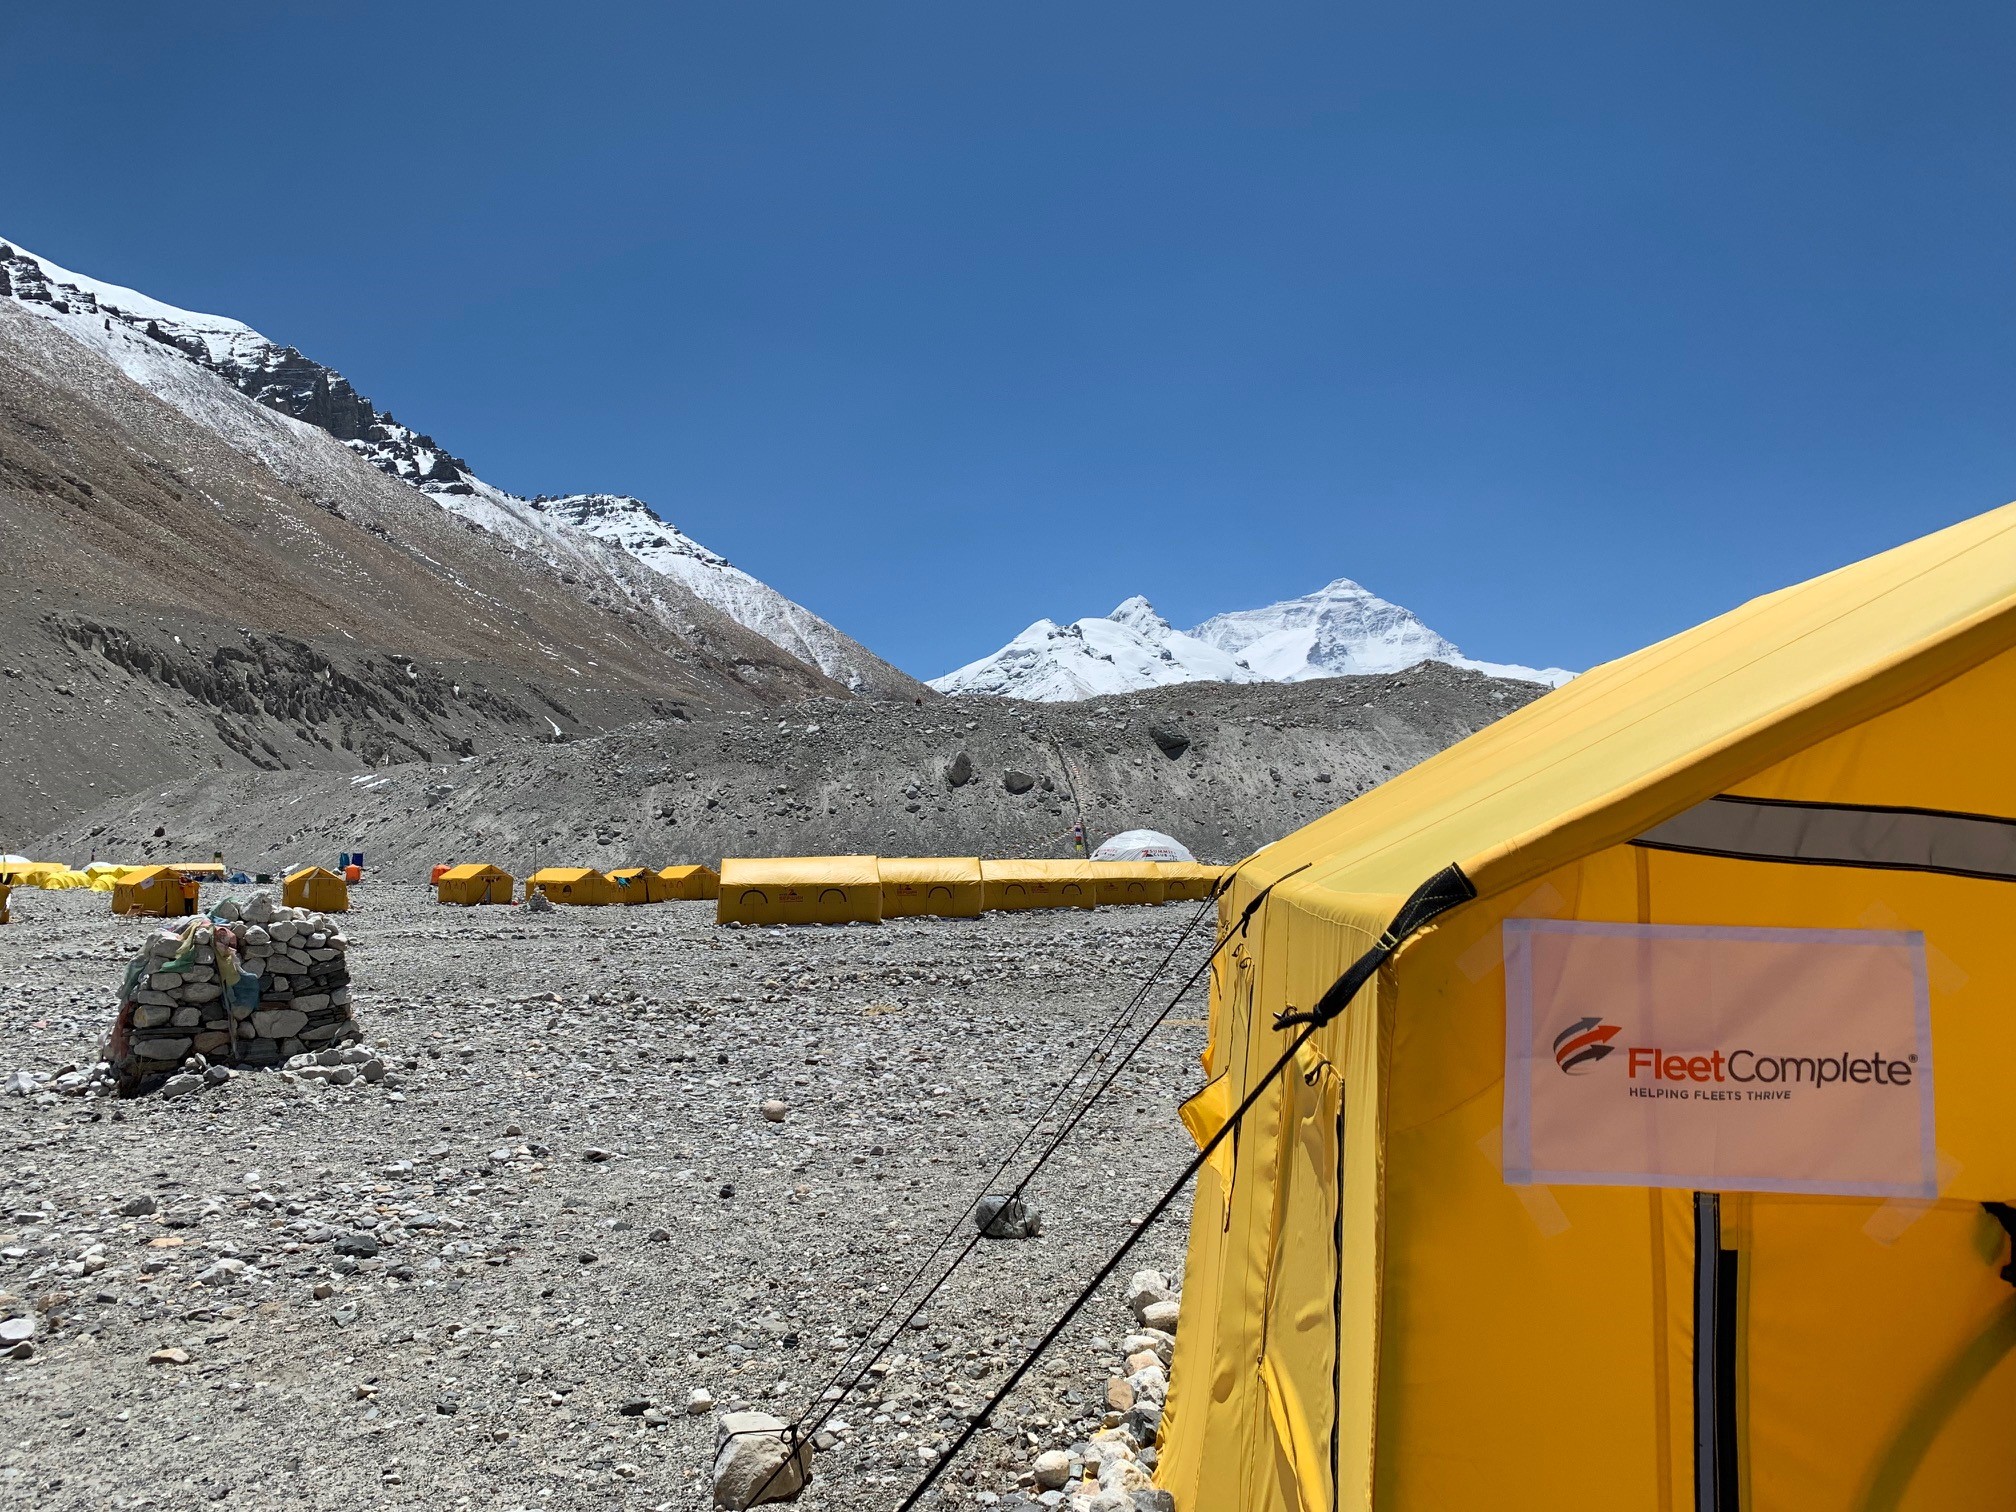 Base camp of Mount Everest with a tent and a Fleet Complete Logo display.